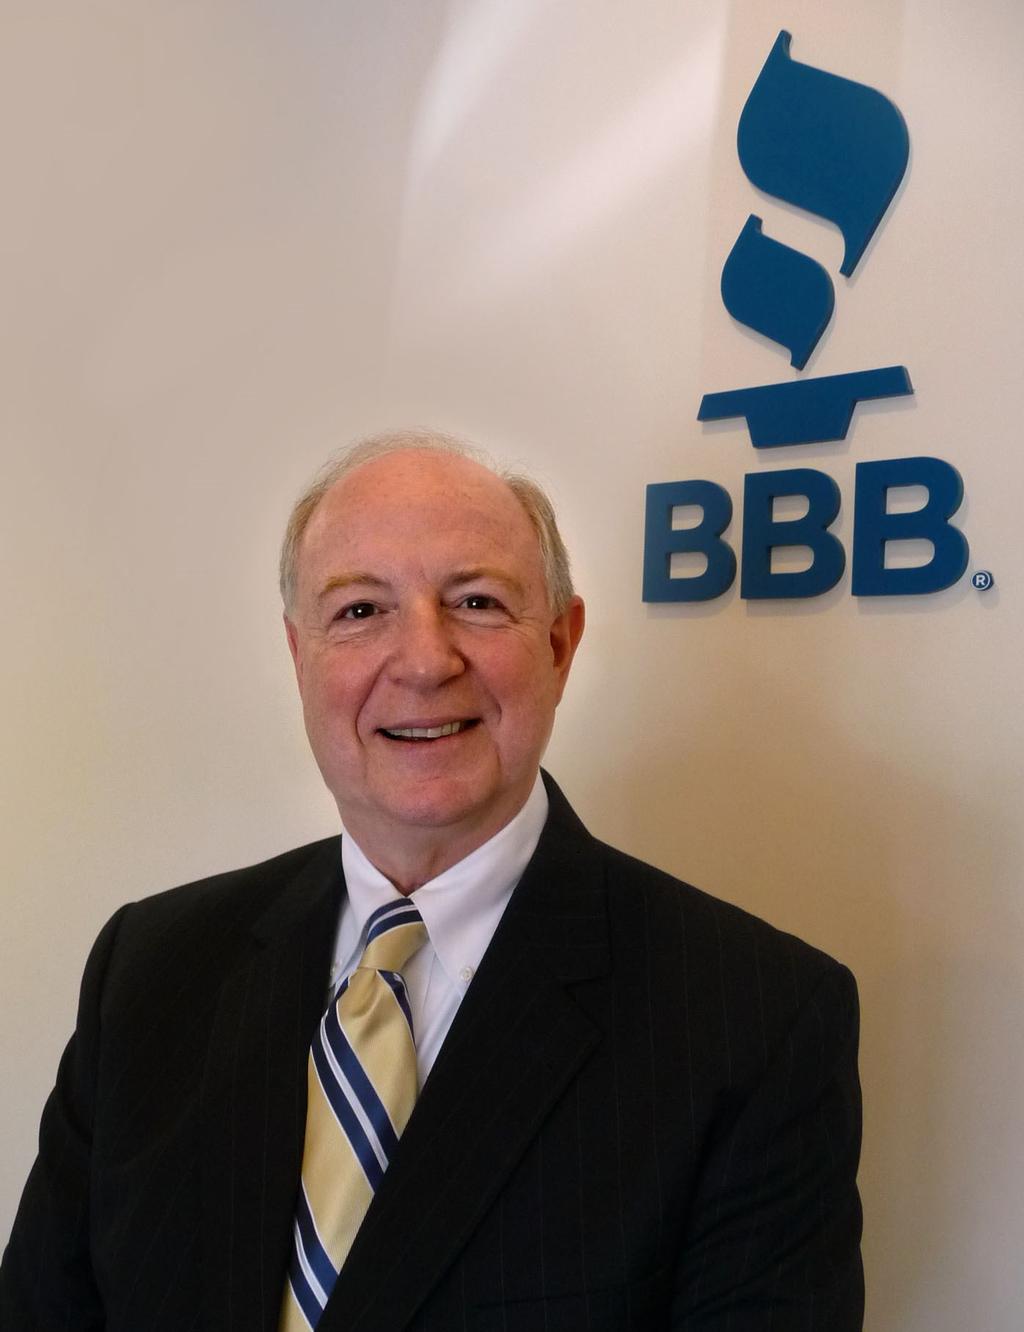 Message from the President This annual report is a review of Better Business Bureau (BBB) programs and services for the year ending December 31, 2013.